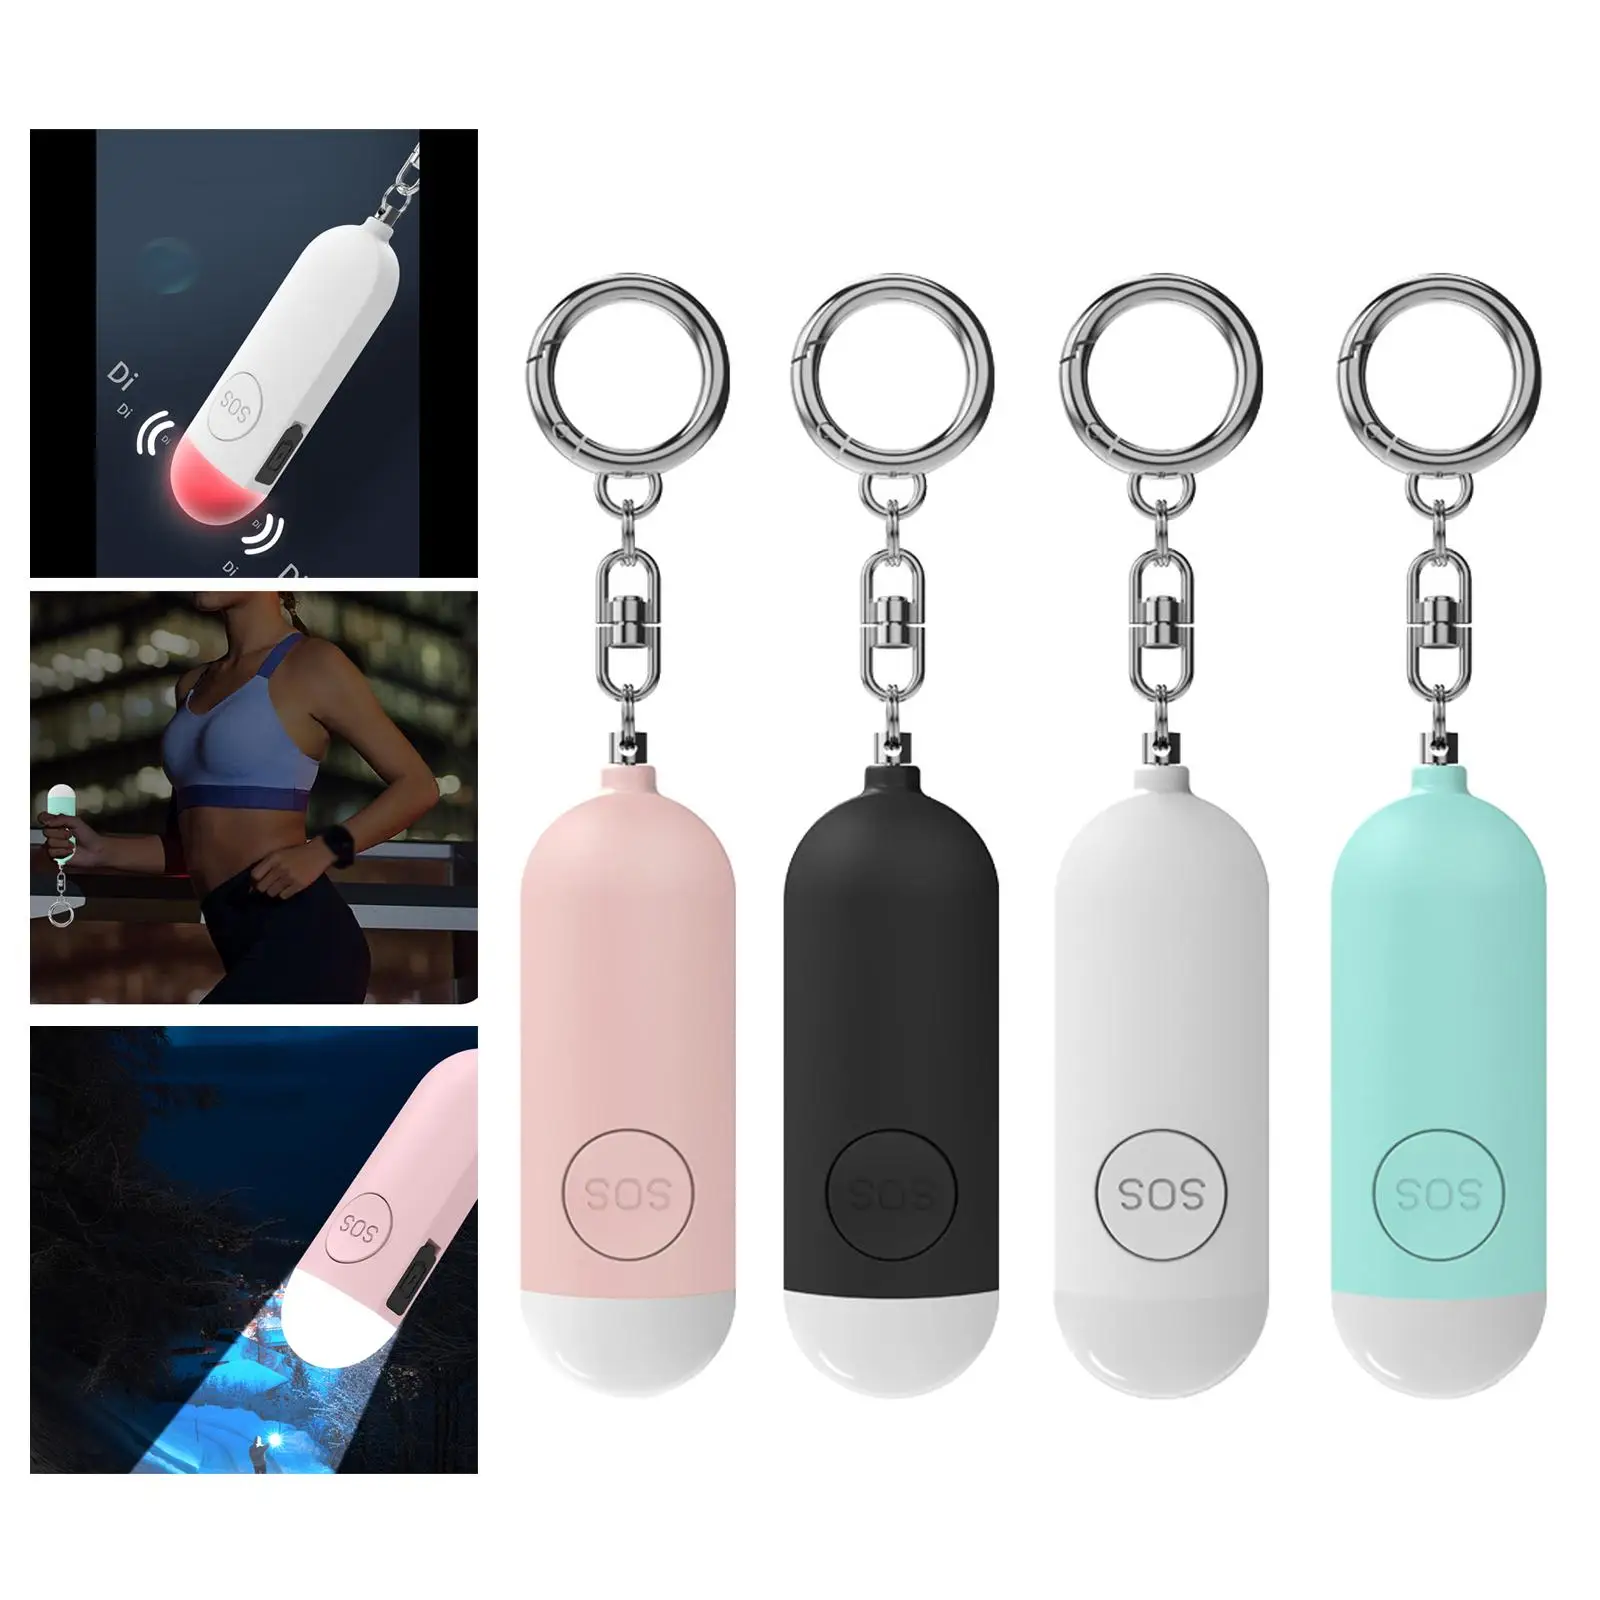 Upgraded Self Defend Alarms Keychain Protection Loud Secure Protect for Walkers Girls Children Travel Camping